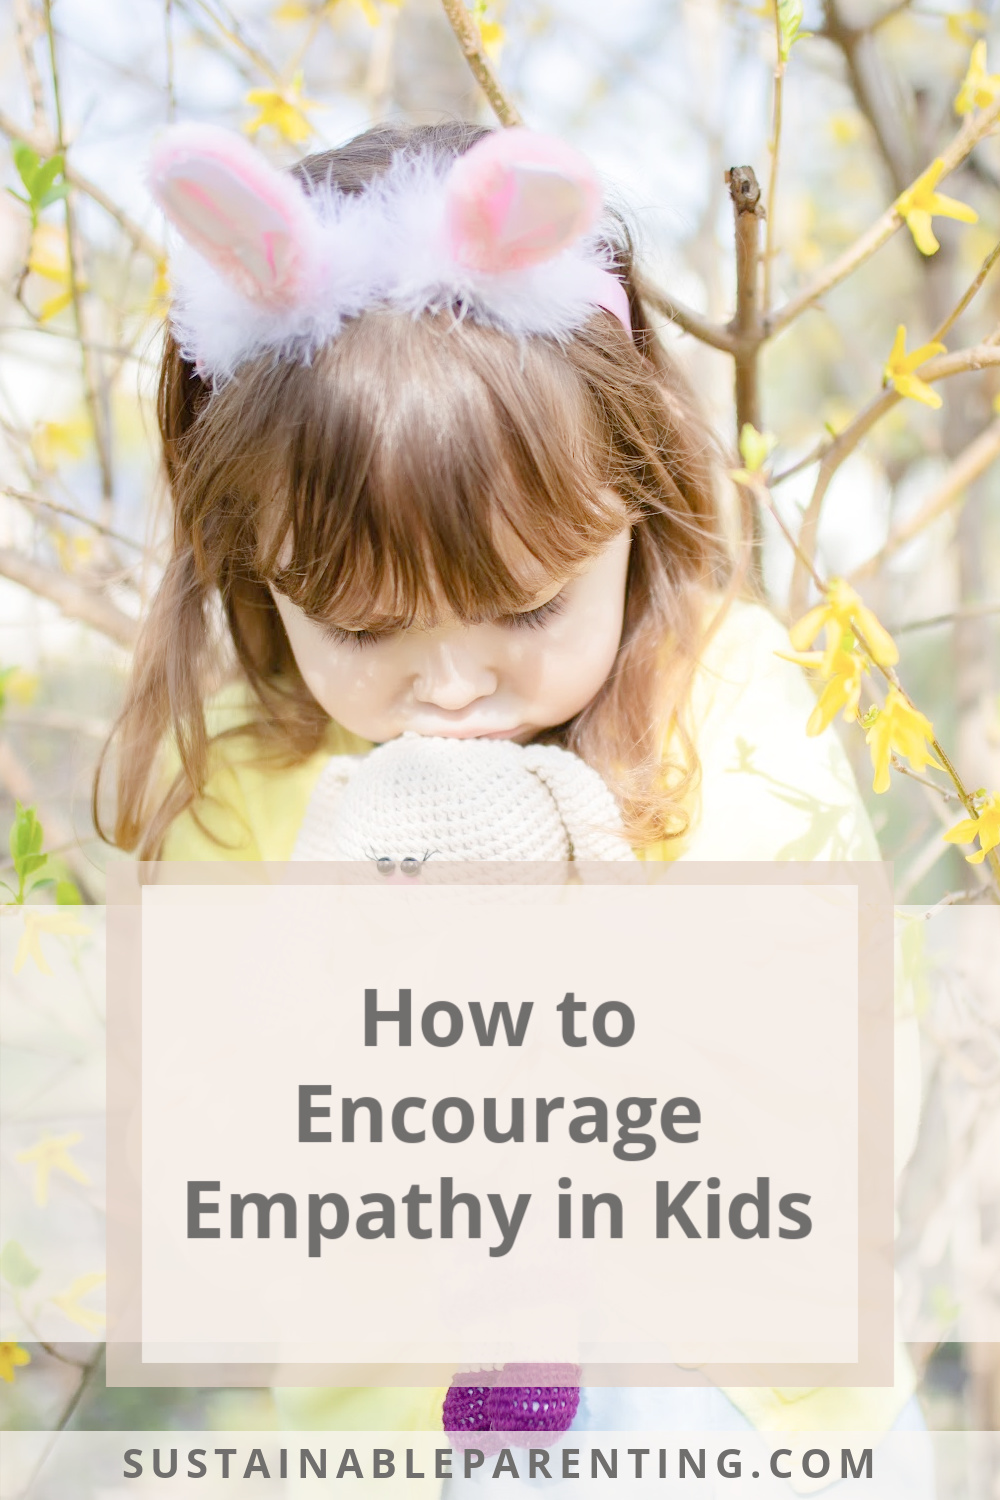 How to Encourage Empathy in Kids